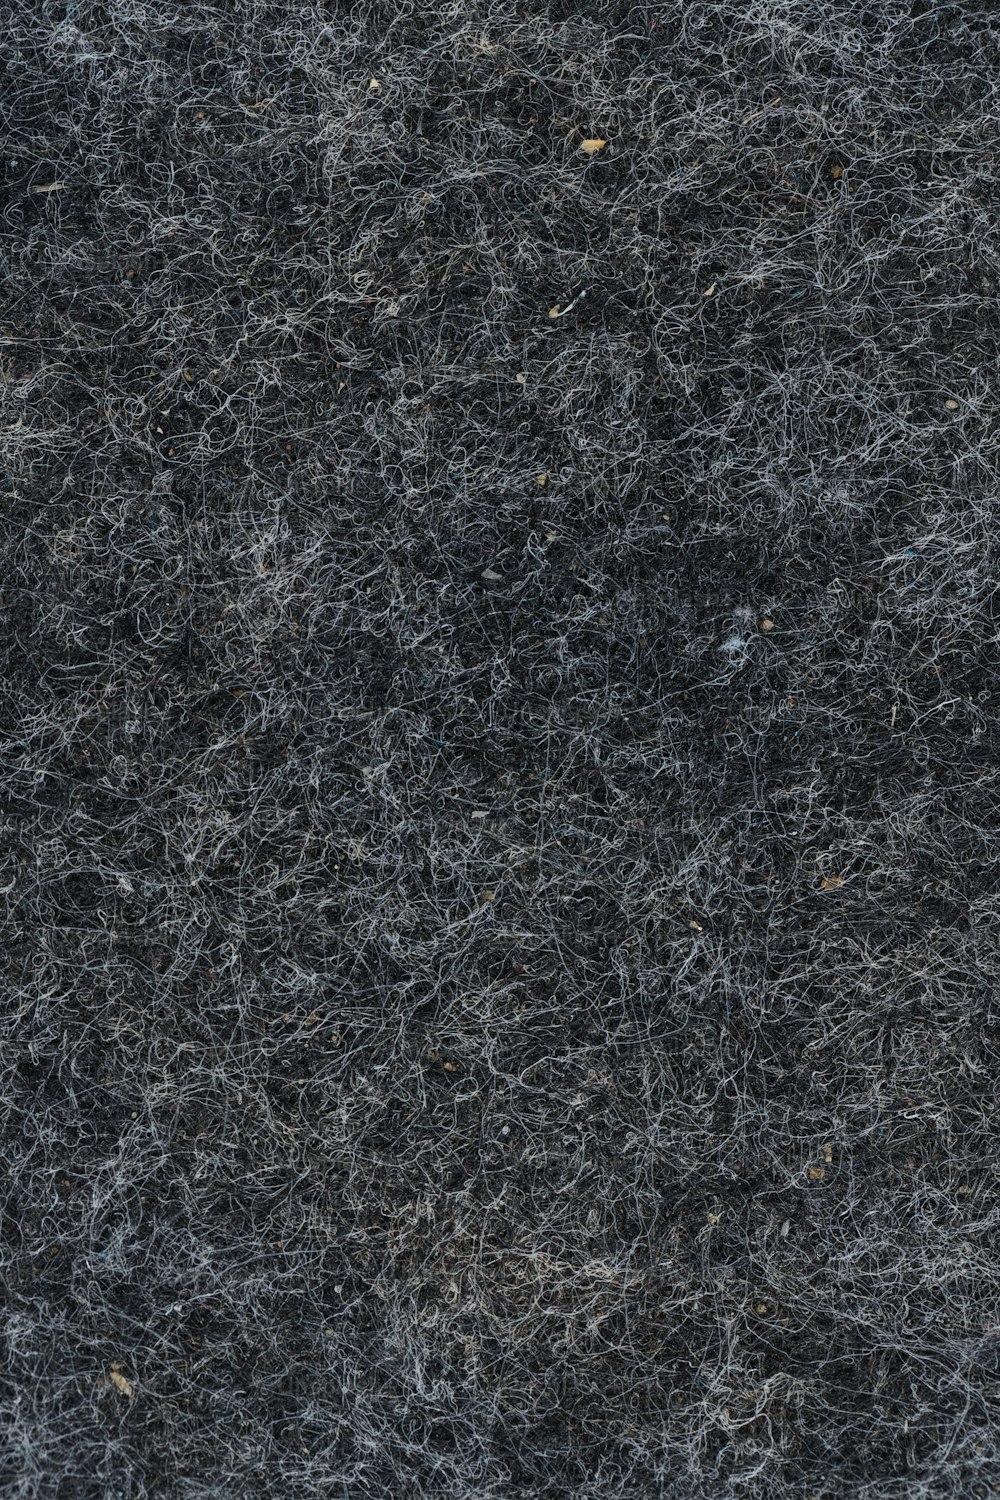 a close up of a black and white textured surface